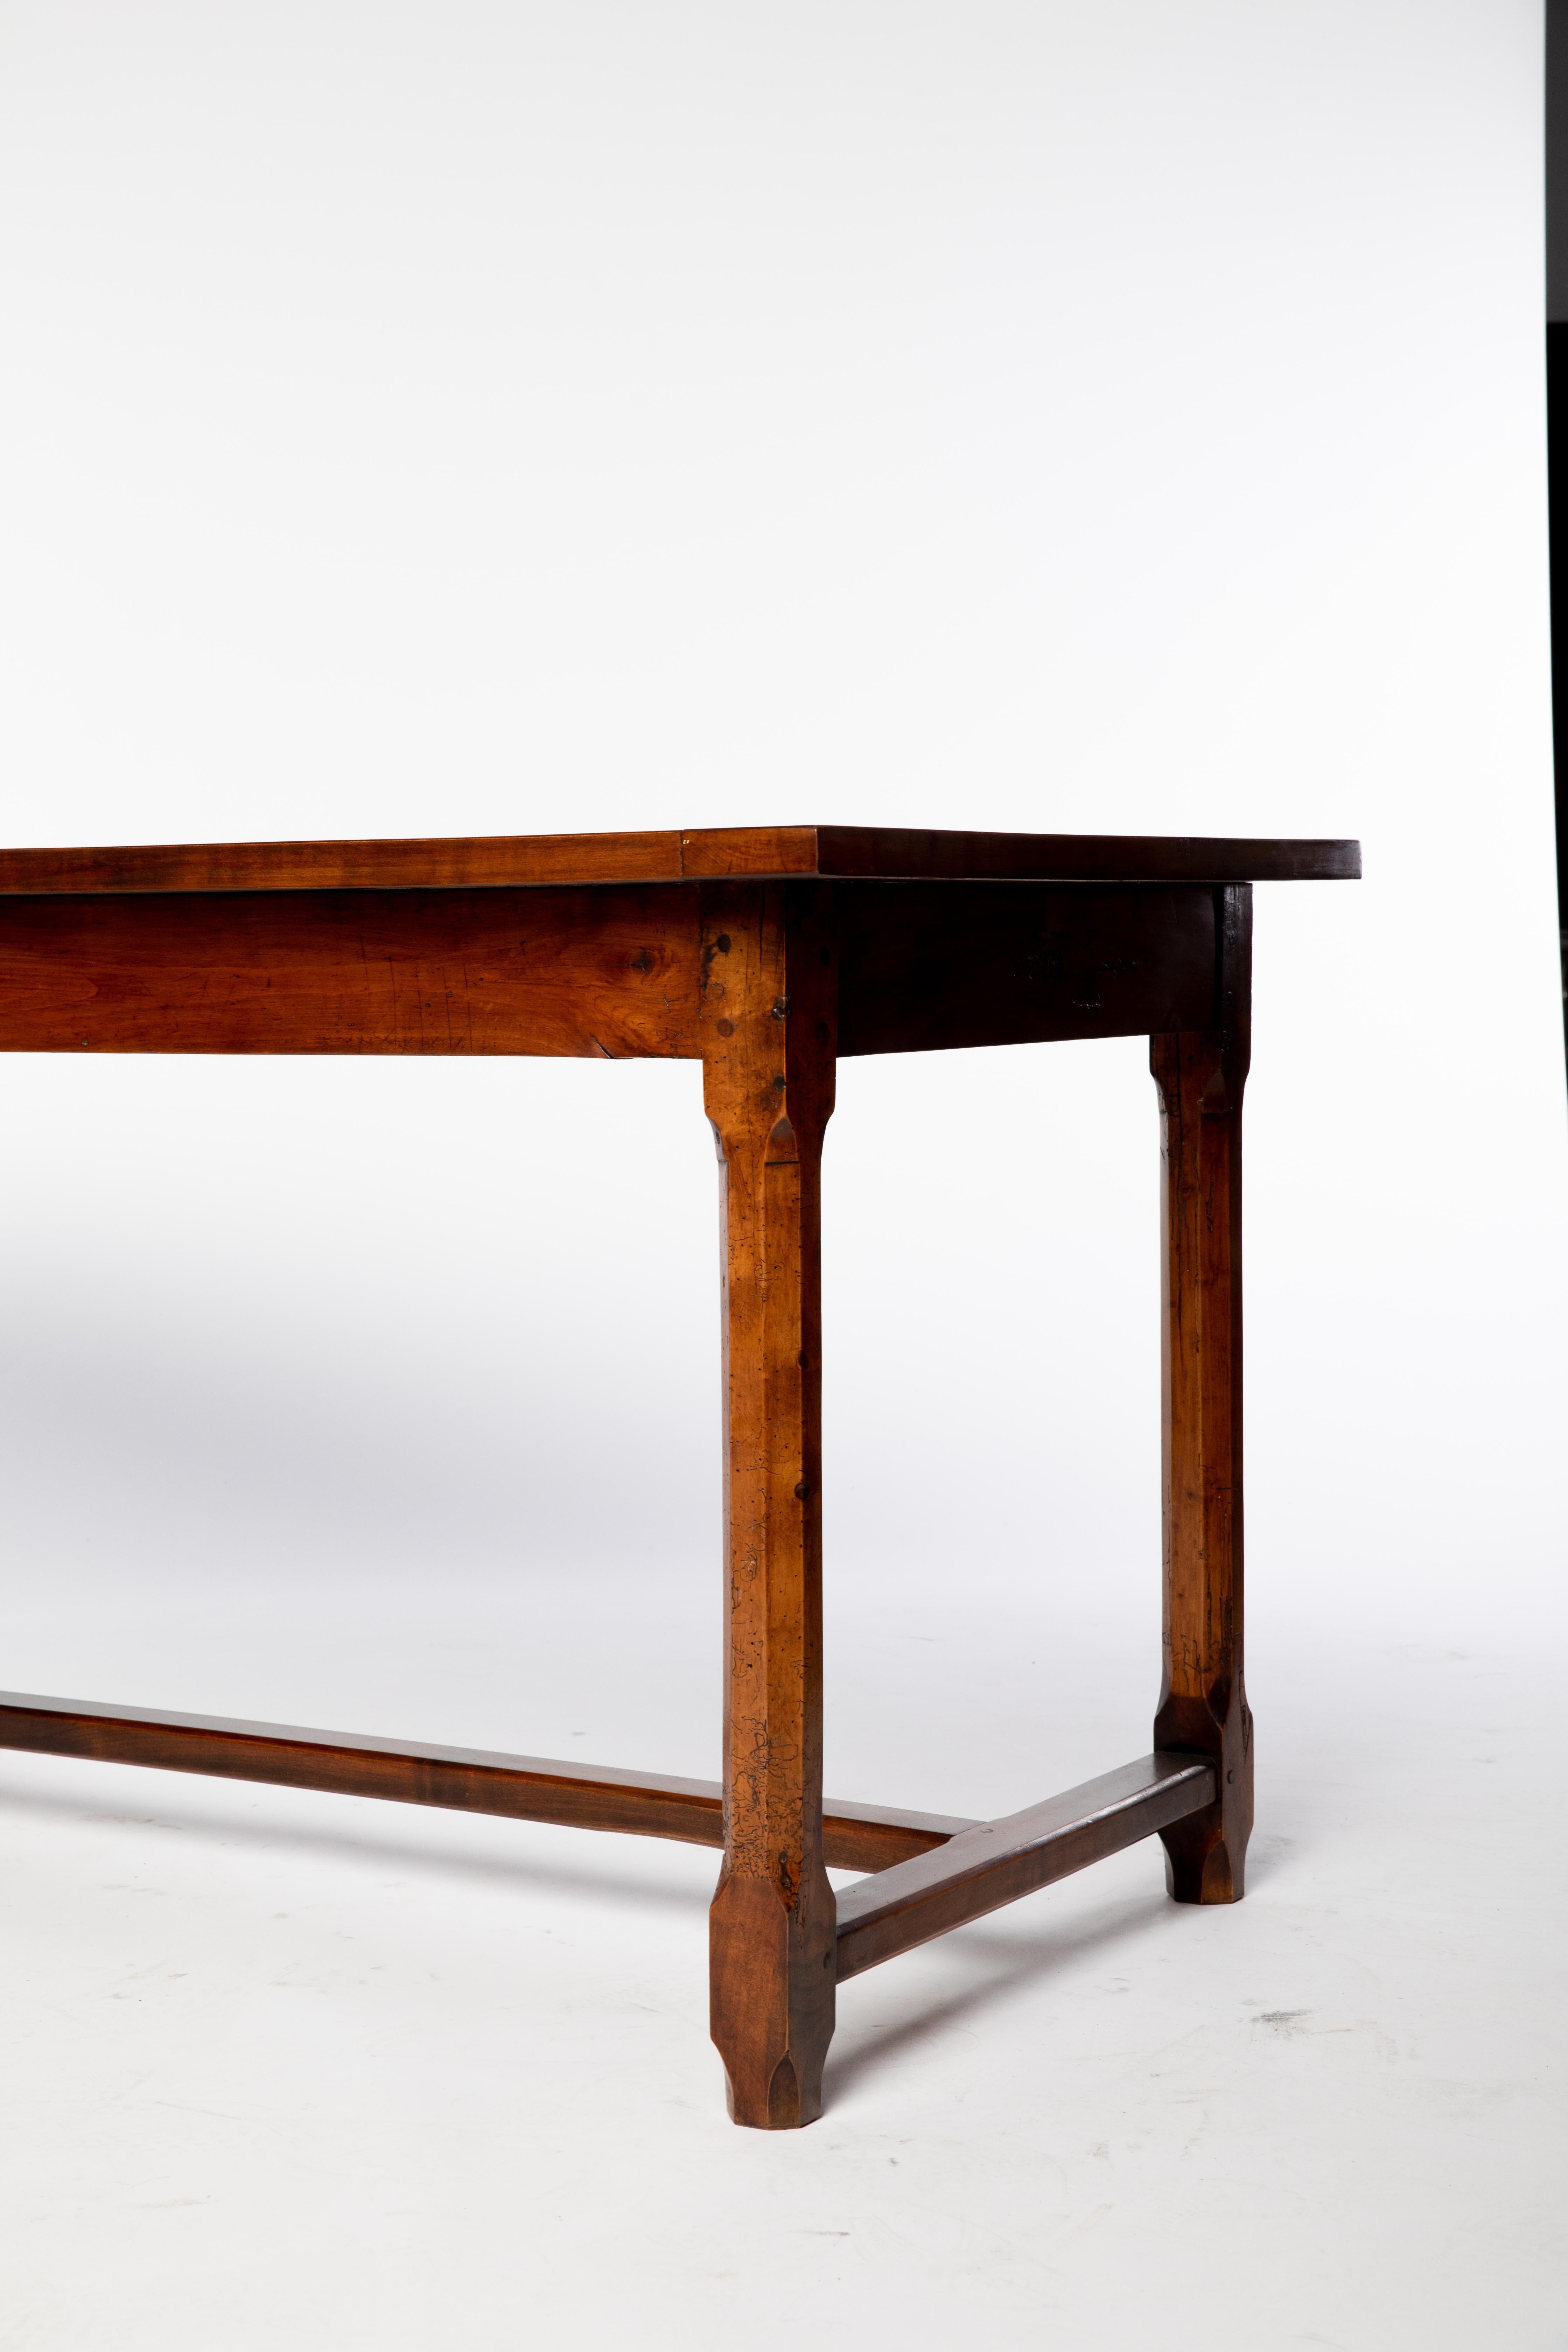 Rustic French fruitwood farmhouse table, mid 19th c., having rectangular plank top, over stretcher-joined octagonal legs, patched repairs to tabletop.